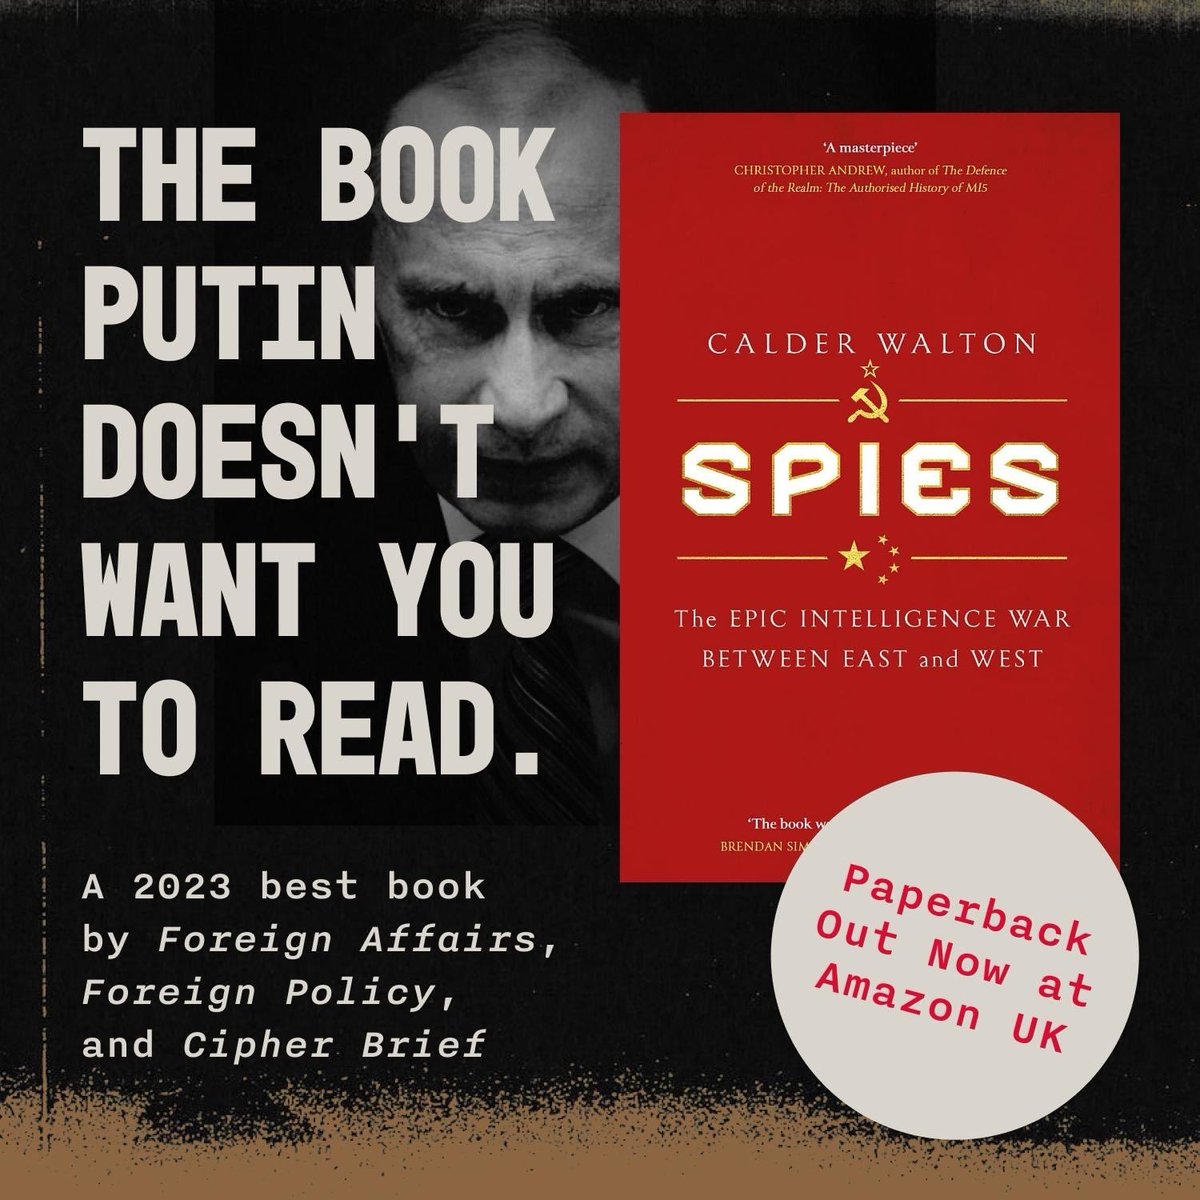 🚨 UK Readers! Last summer, after the release of #SPIES , I found myself officially sanctioned by the Russian government. This is the book that Putin DOES NOT want you to read. Today, the paperback edition hits the shelves in the UK. Order here: amzn.eu/d/9U1XFfD